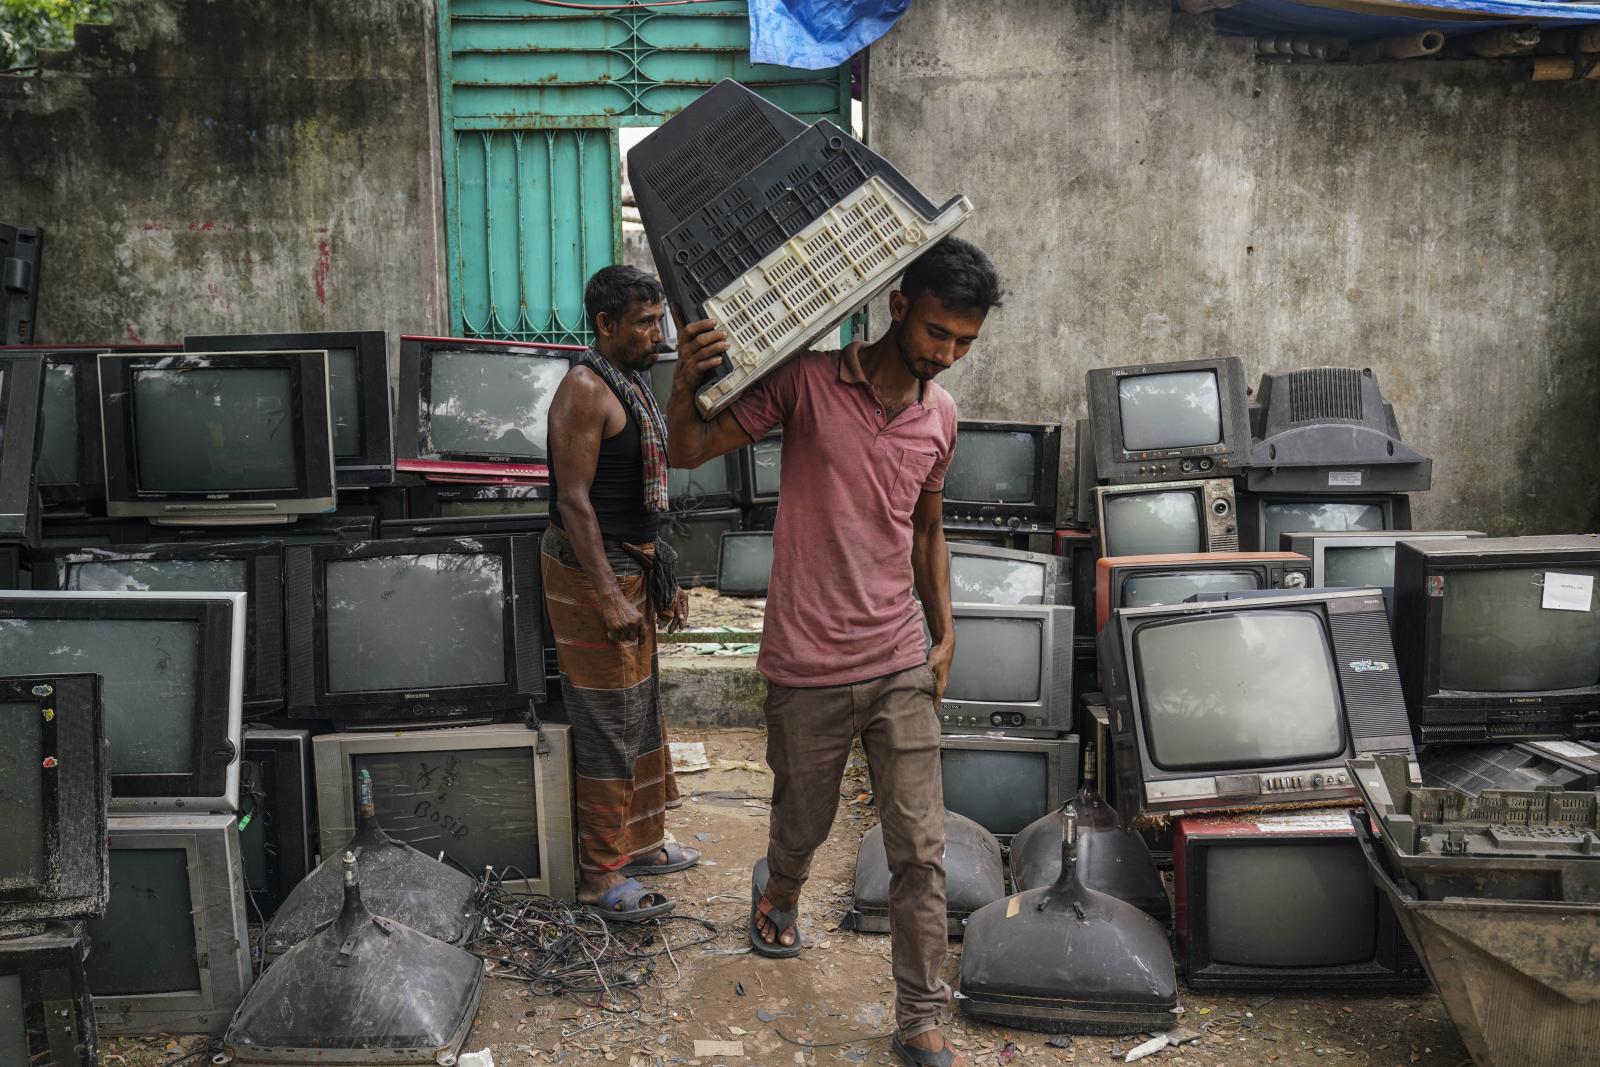 E- Waste | Buy this image